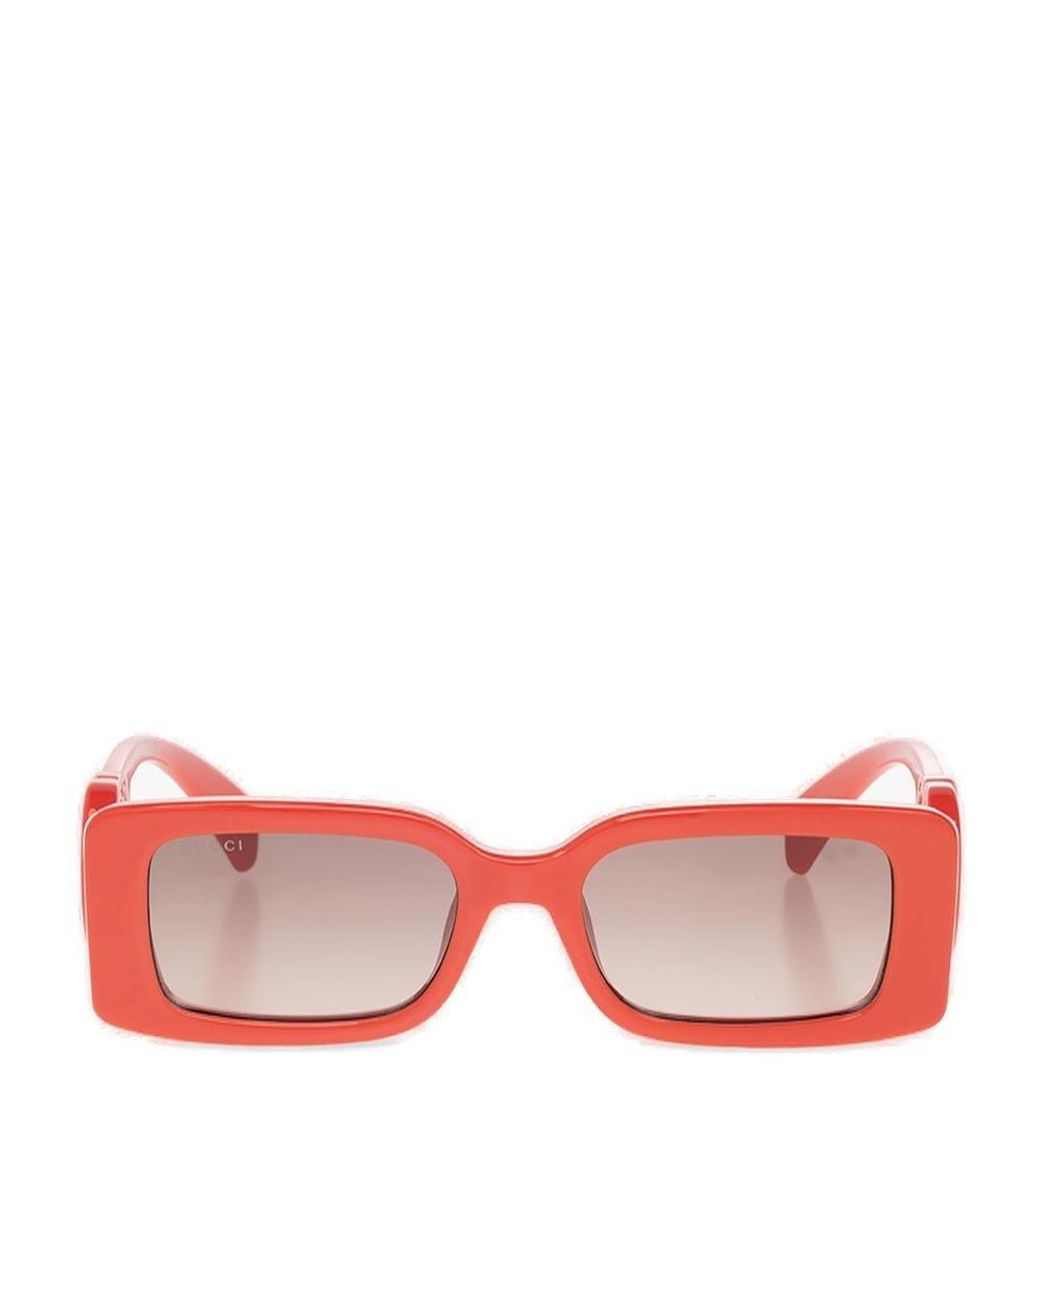 Gucci Eyewear Decorative G Temples Sunglasses in Pink | Lyst